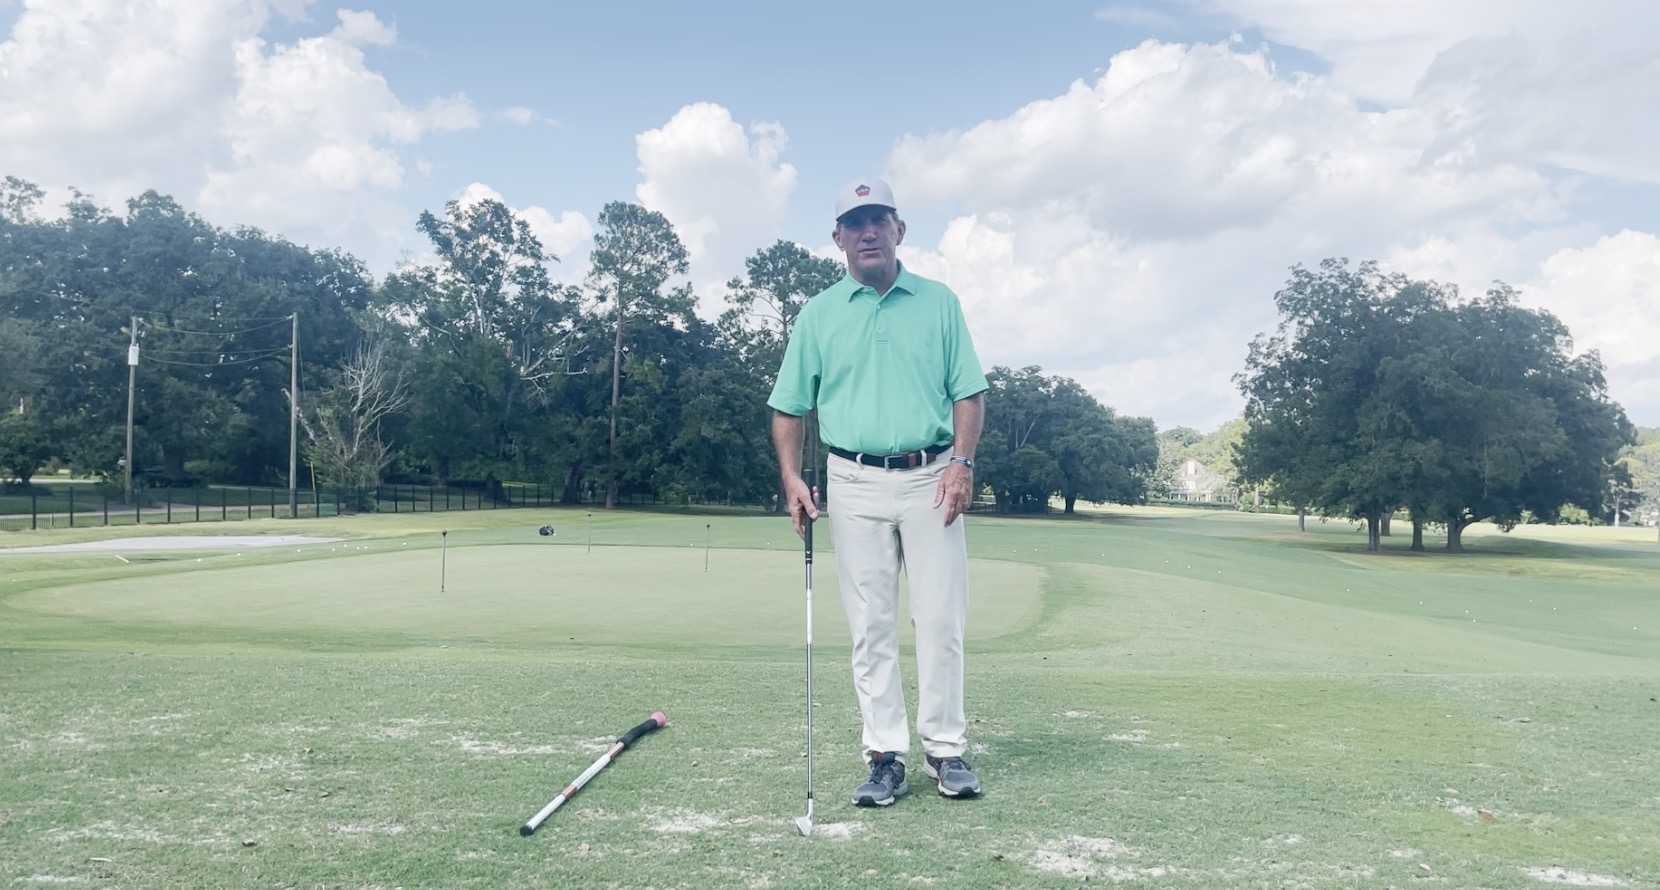 Improve Your Swing Path & Lower Your Scores